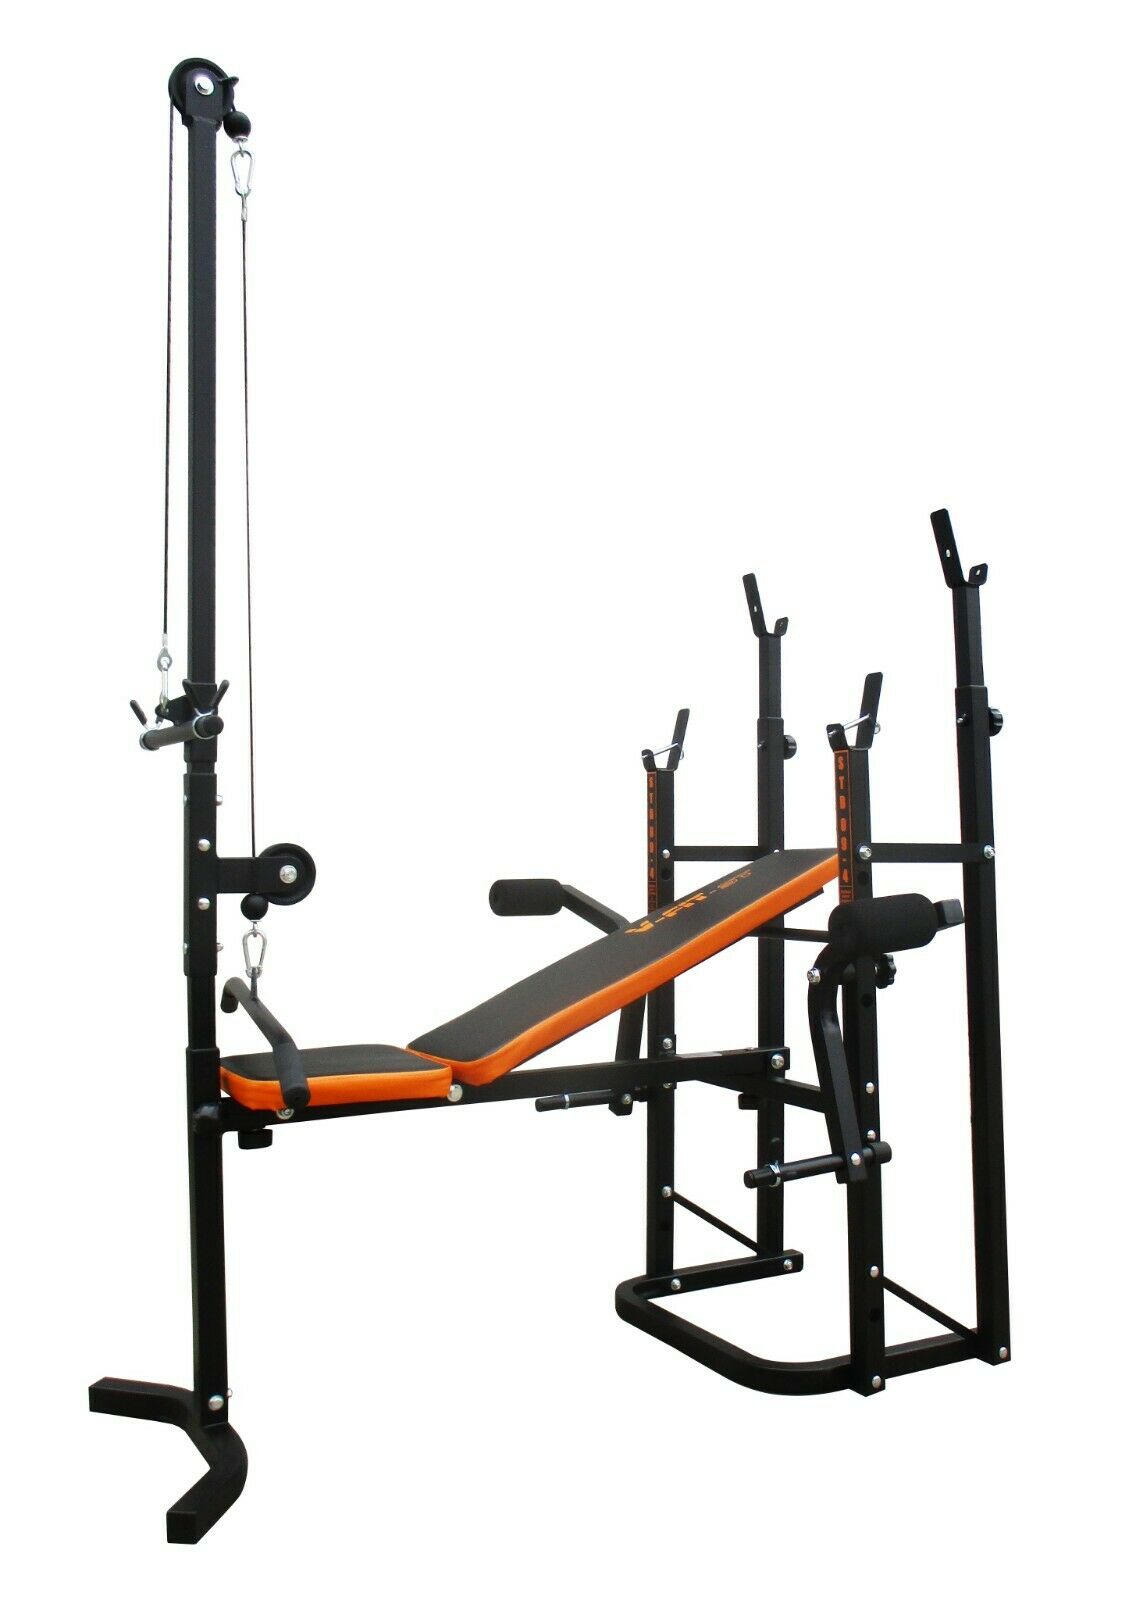 V-fit STB09-4 Folding Weight Bench home gym